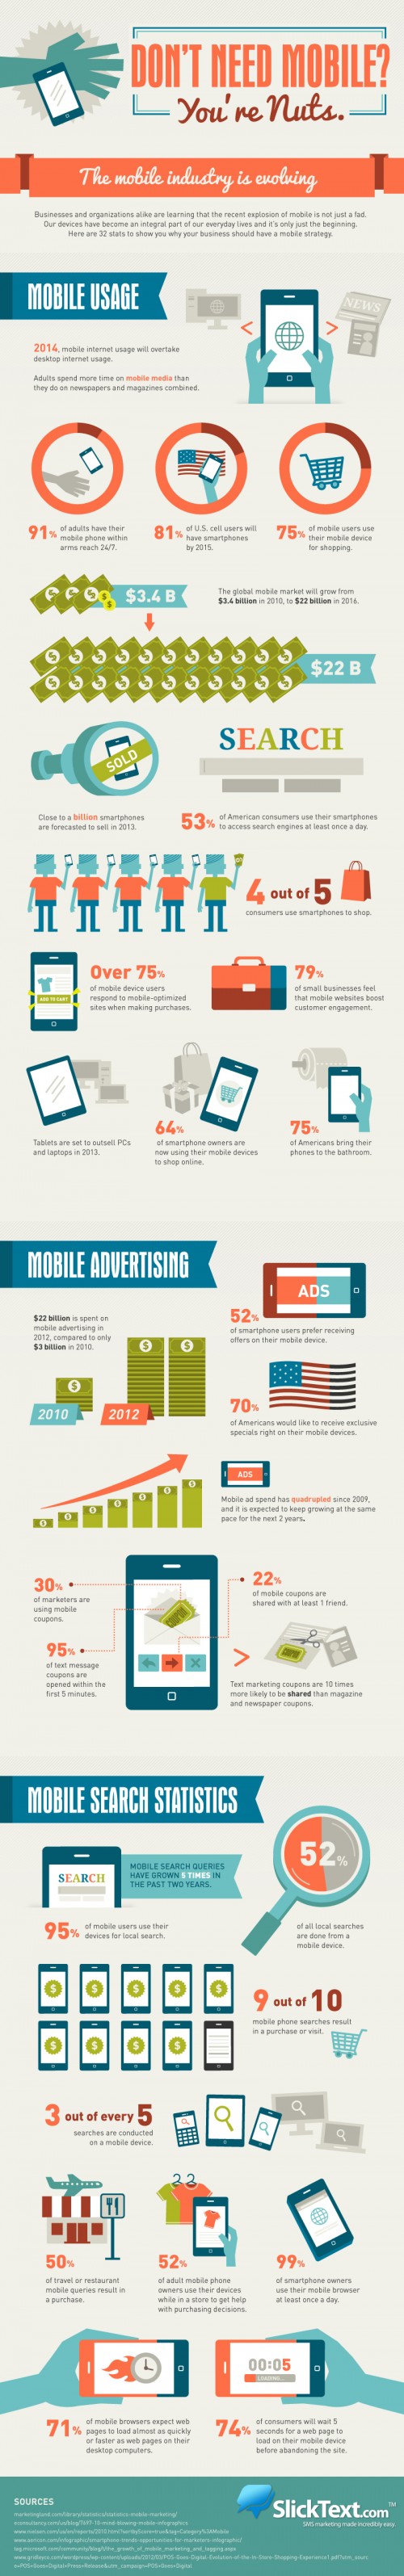 Mobile Marketing and mobile facts Infographic